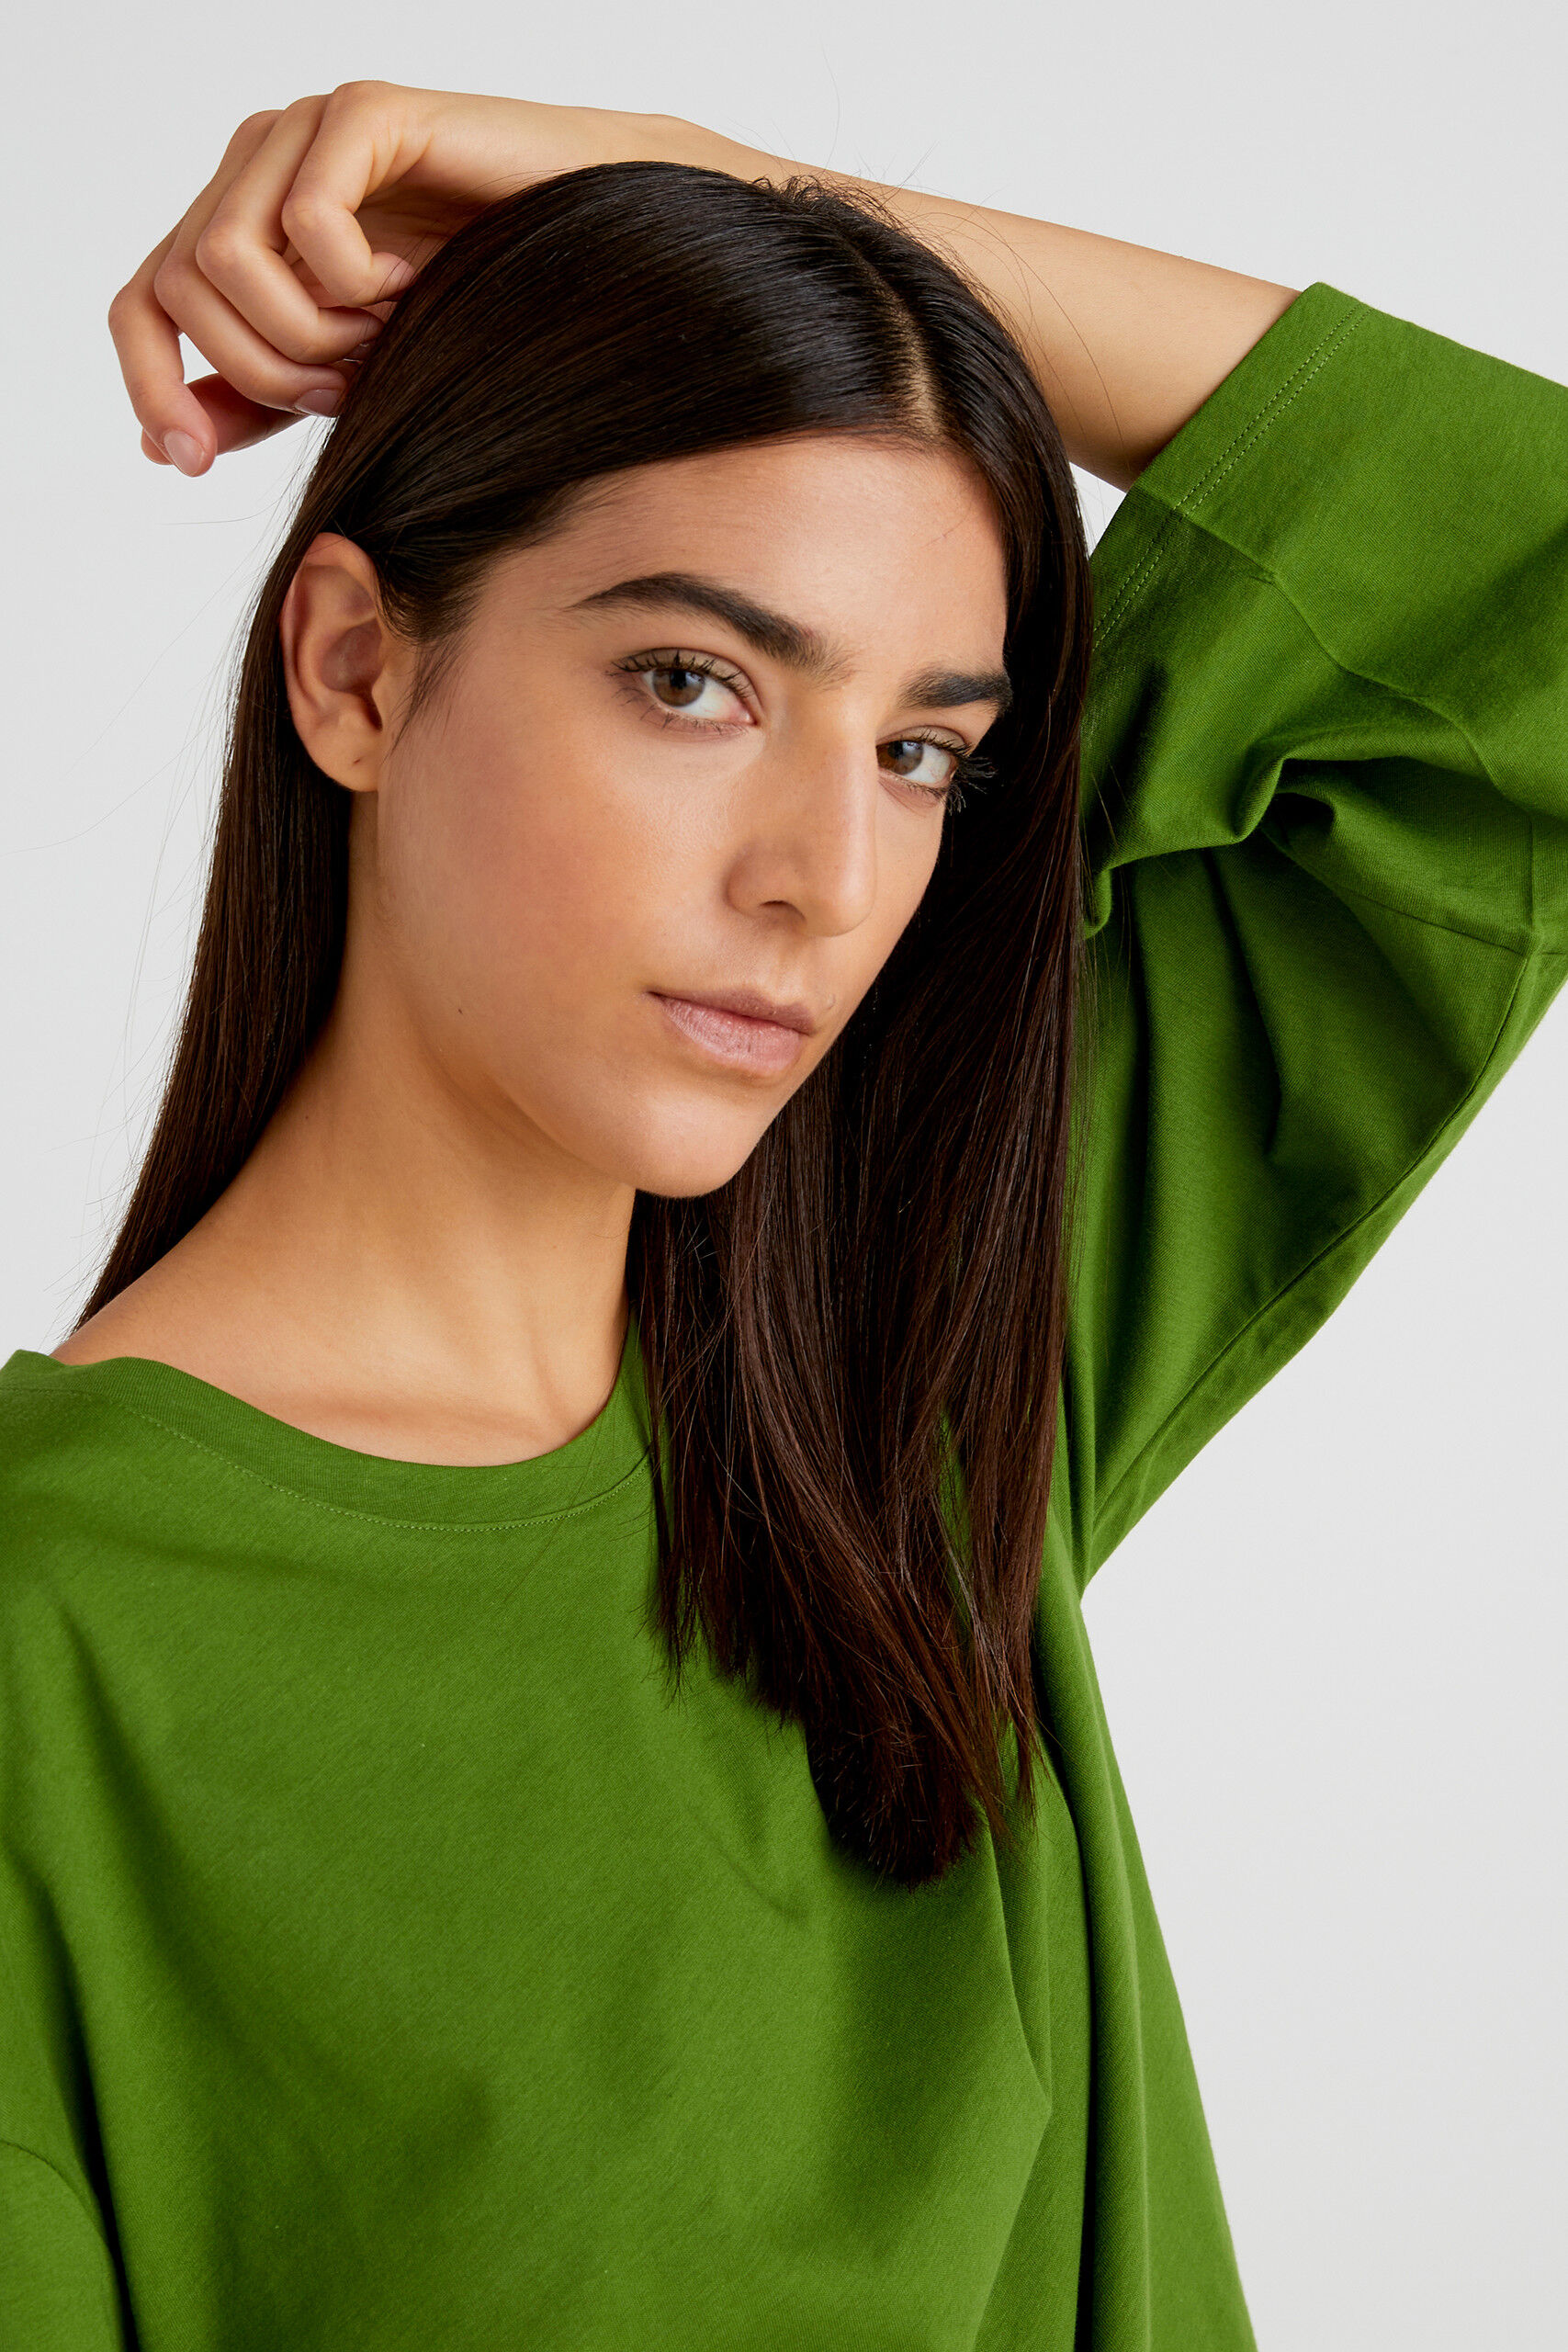 Women's T-shirts and Tops New Collection 2022 | Benetton